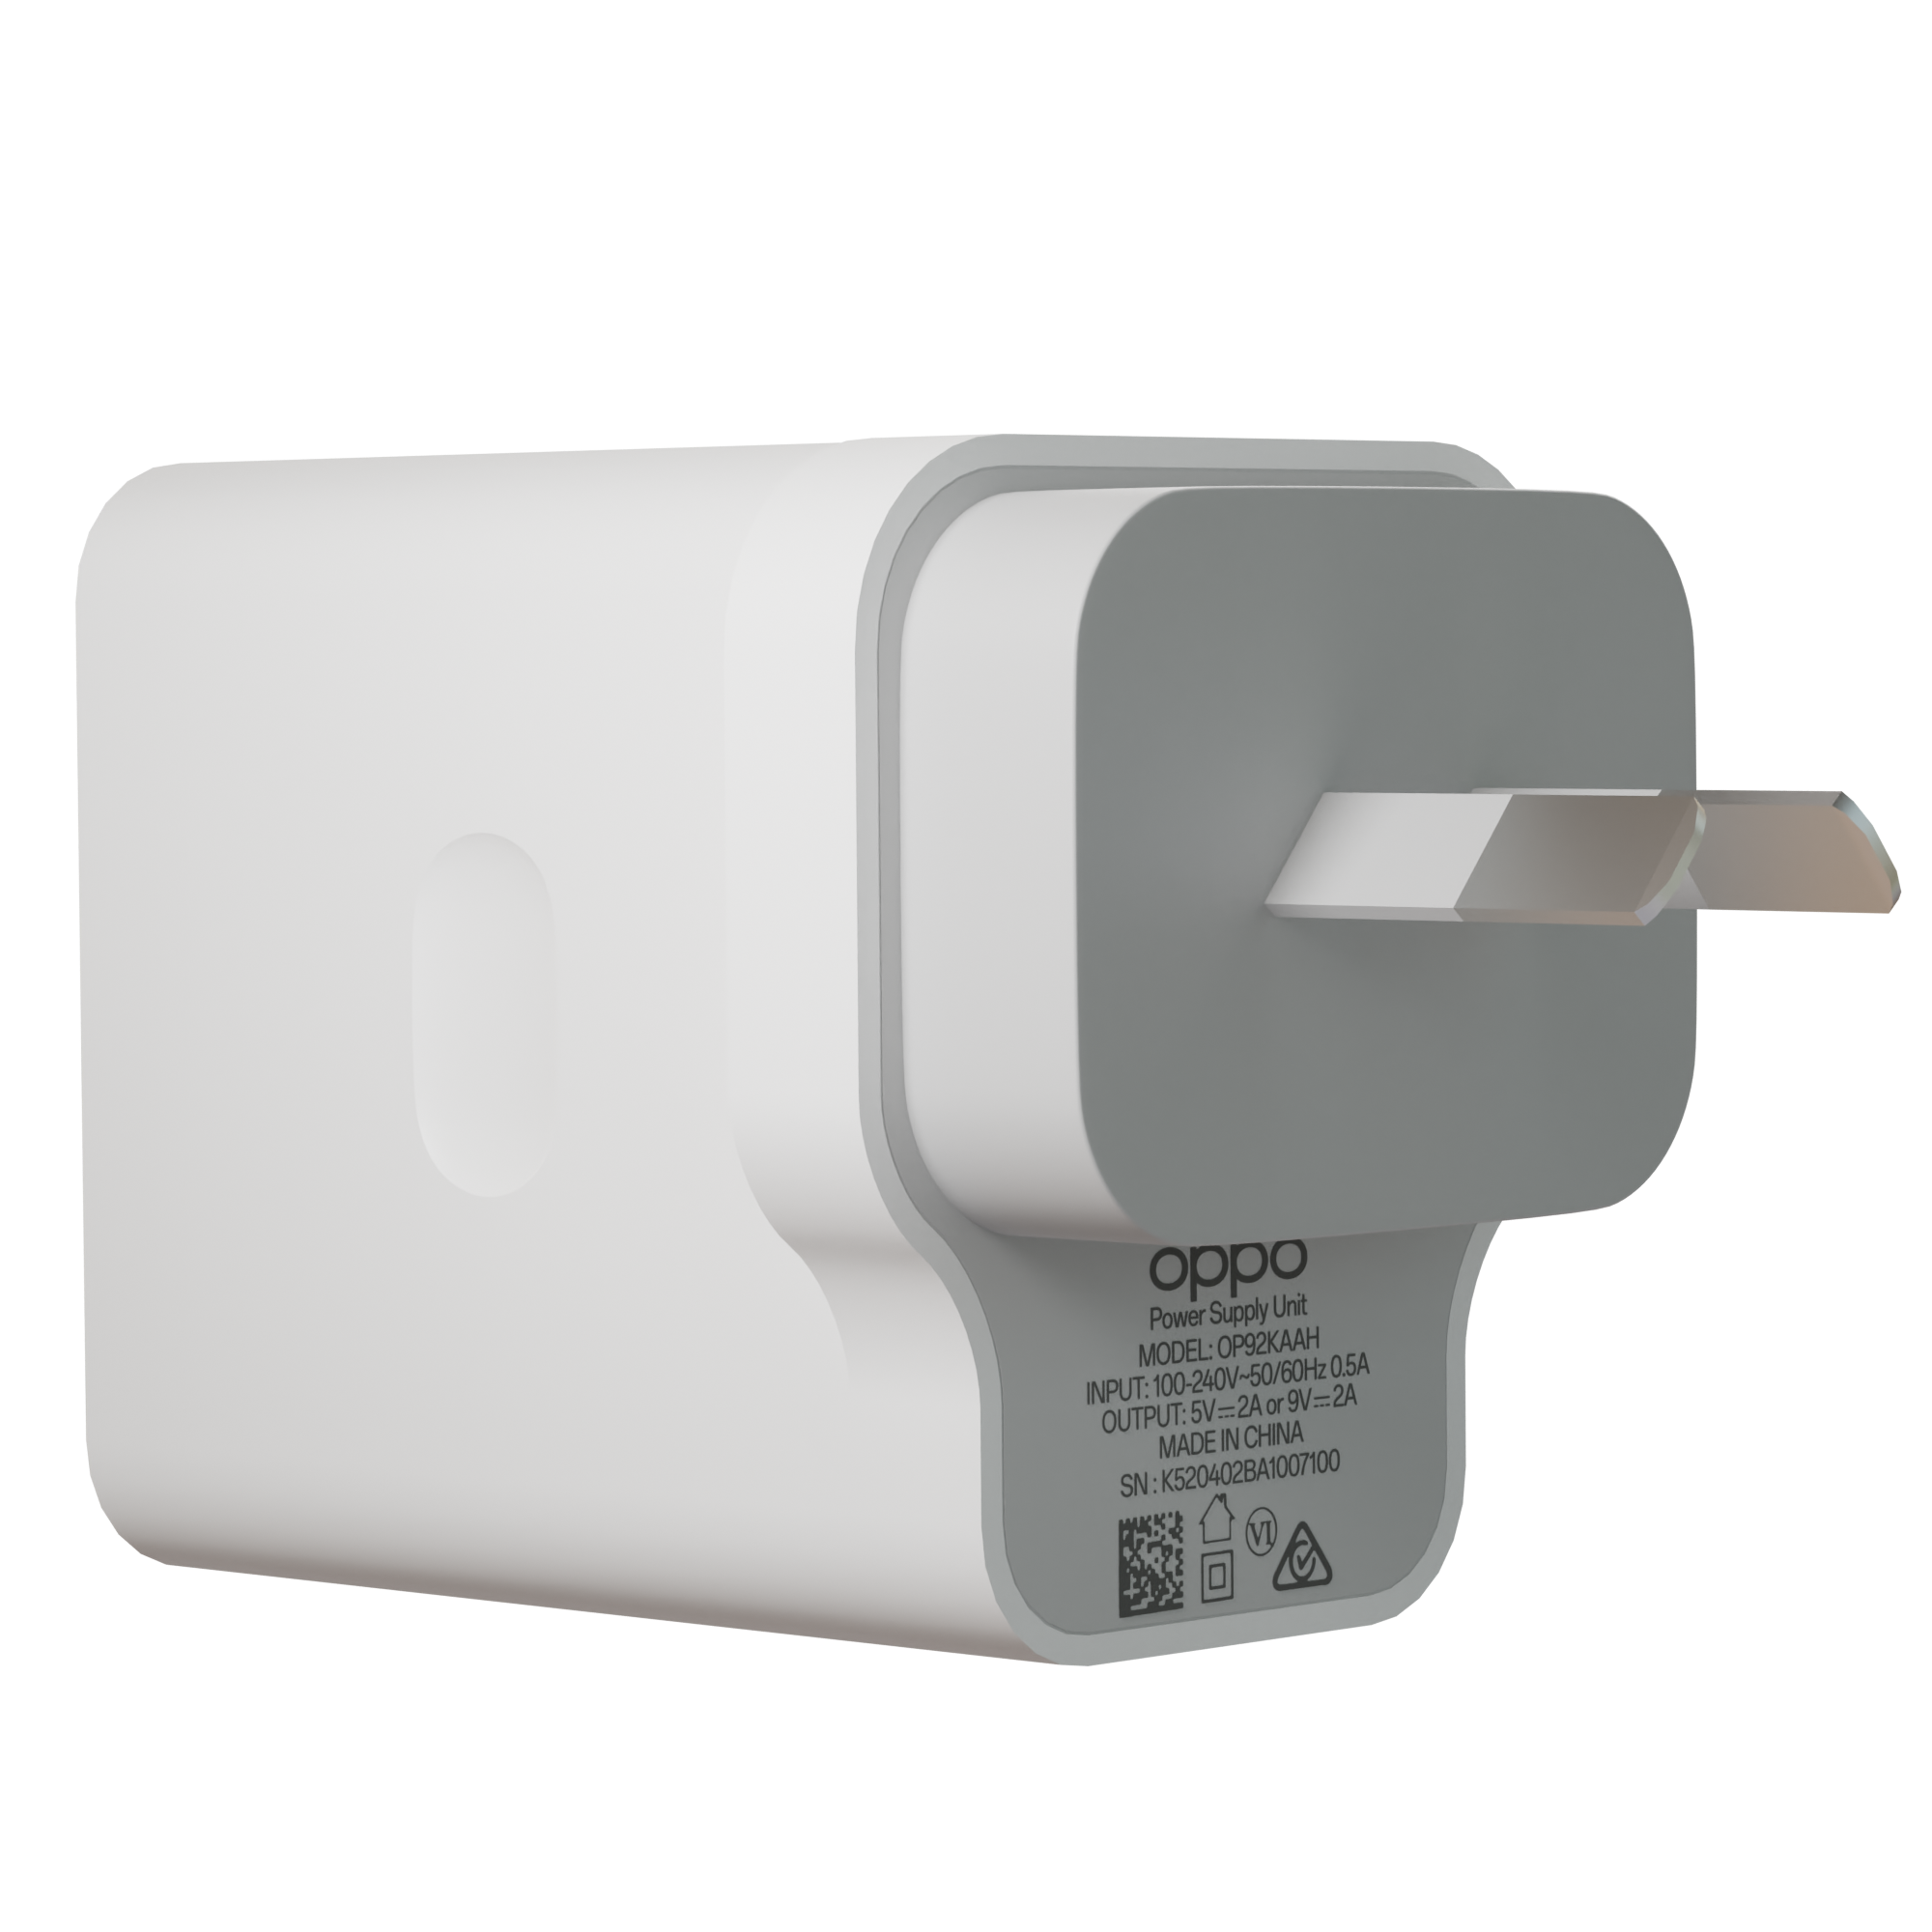 OPPO VOOC 18W Wall Charger